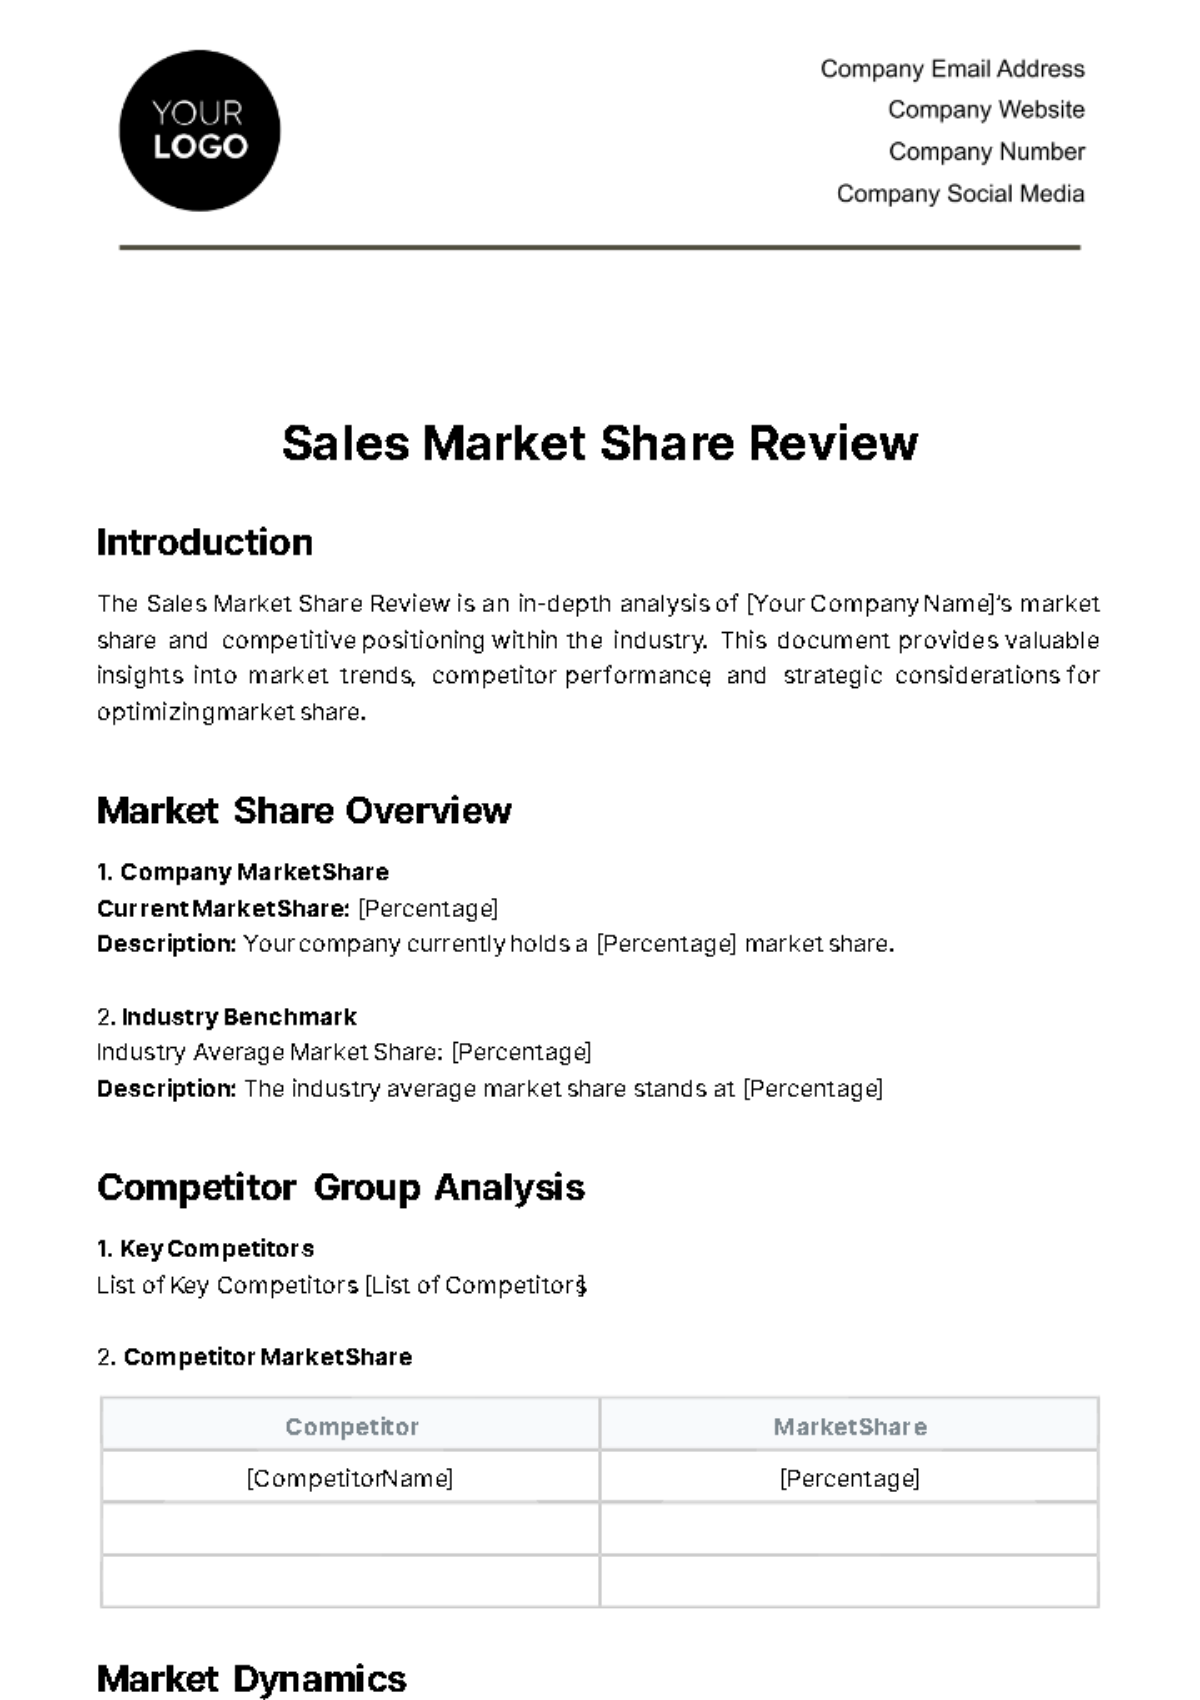 Free Sales Market Share Review Template